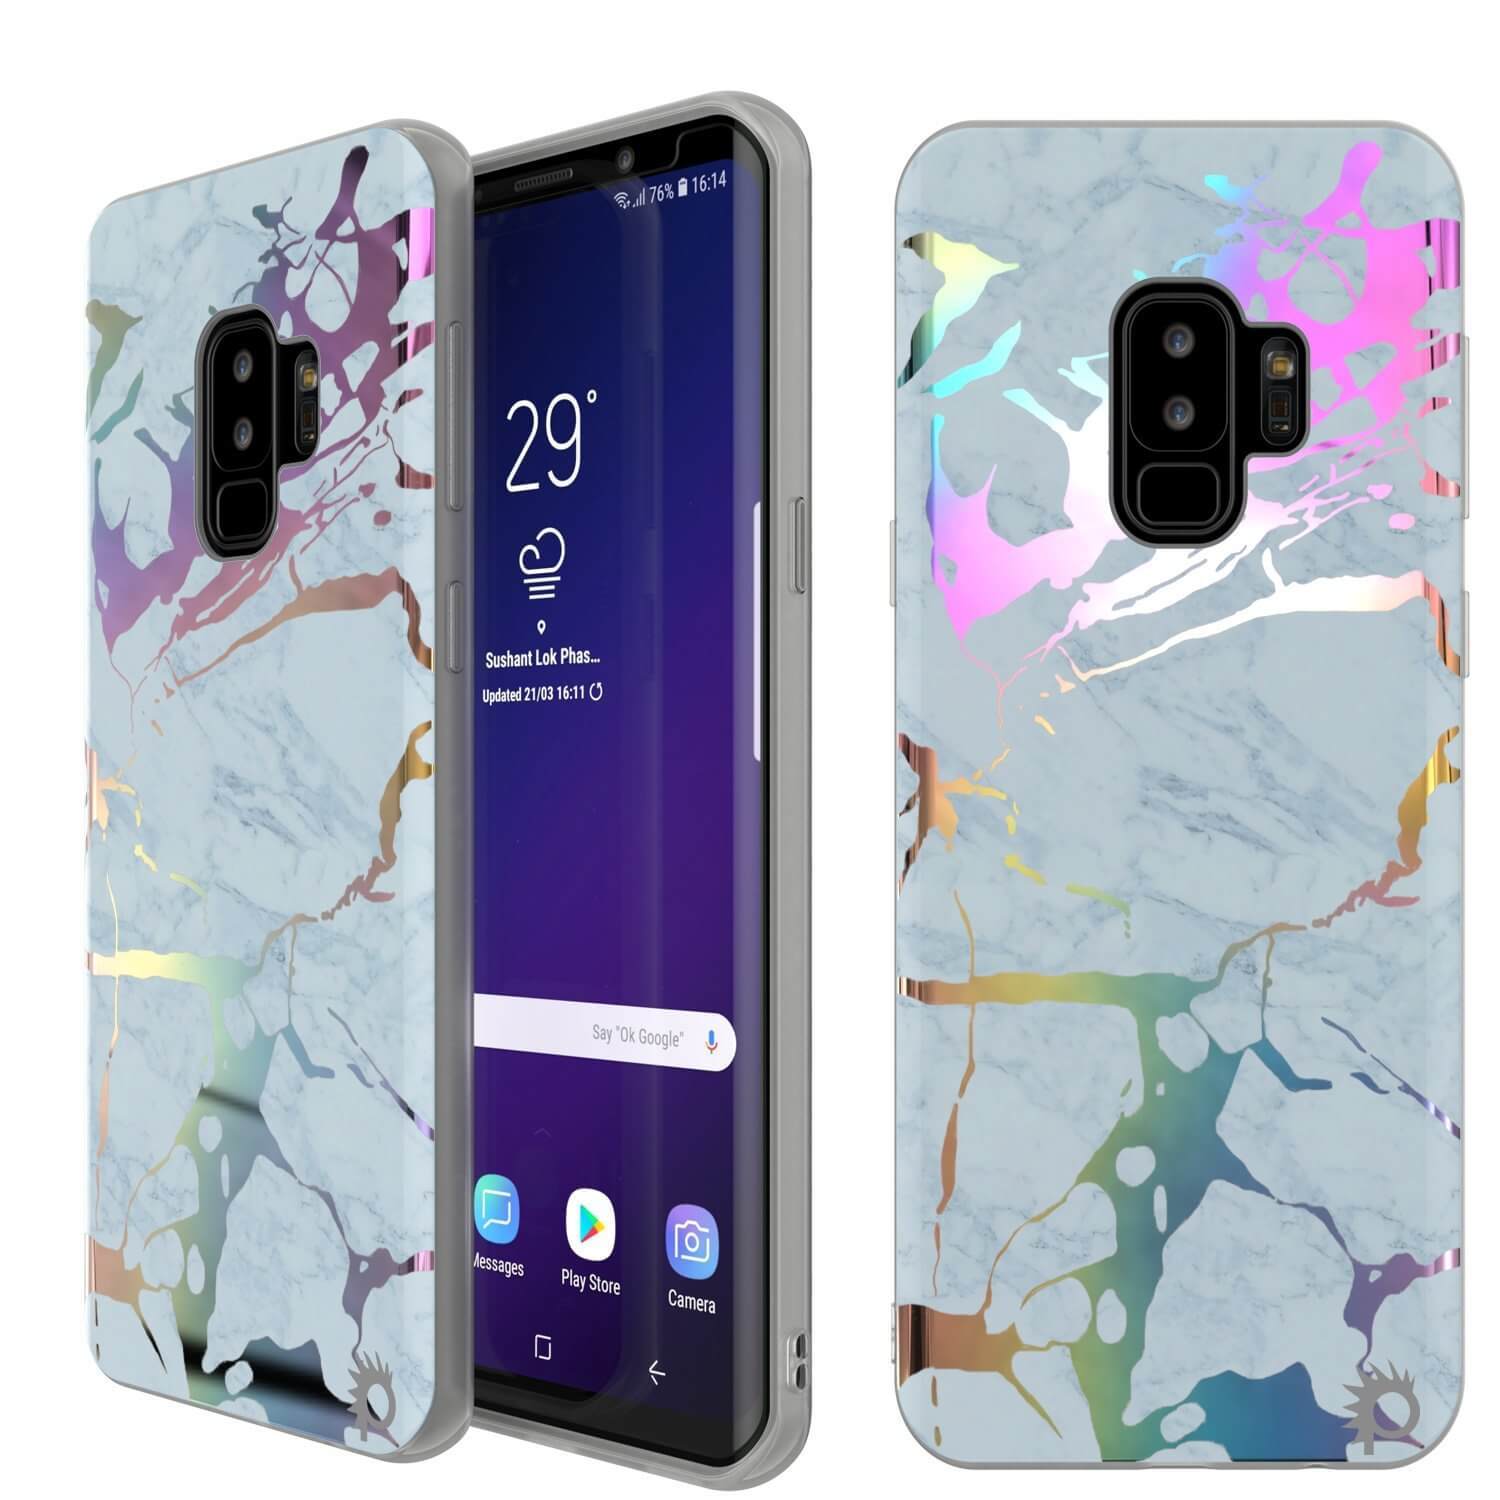 Punkcase Galaxy S9+ Marble Case, Protective Full Body Cover W/PunkShield Screen Protector (Blue Marmo) - PunkCase NZ